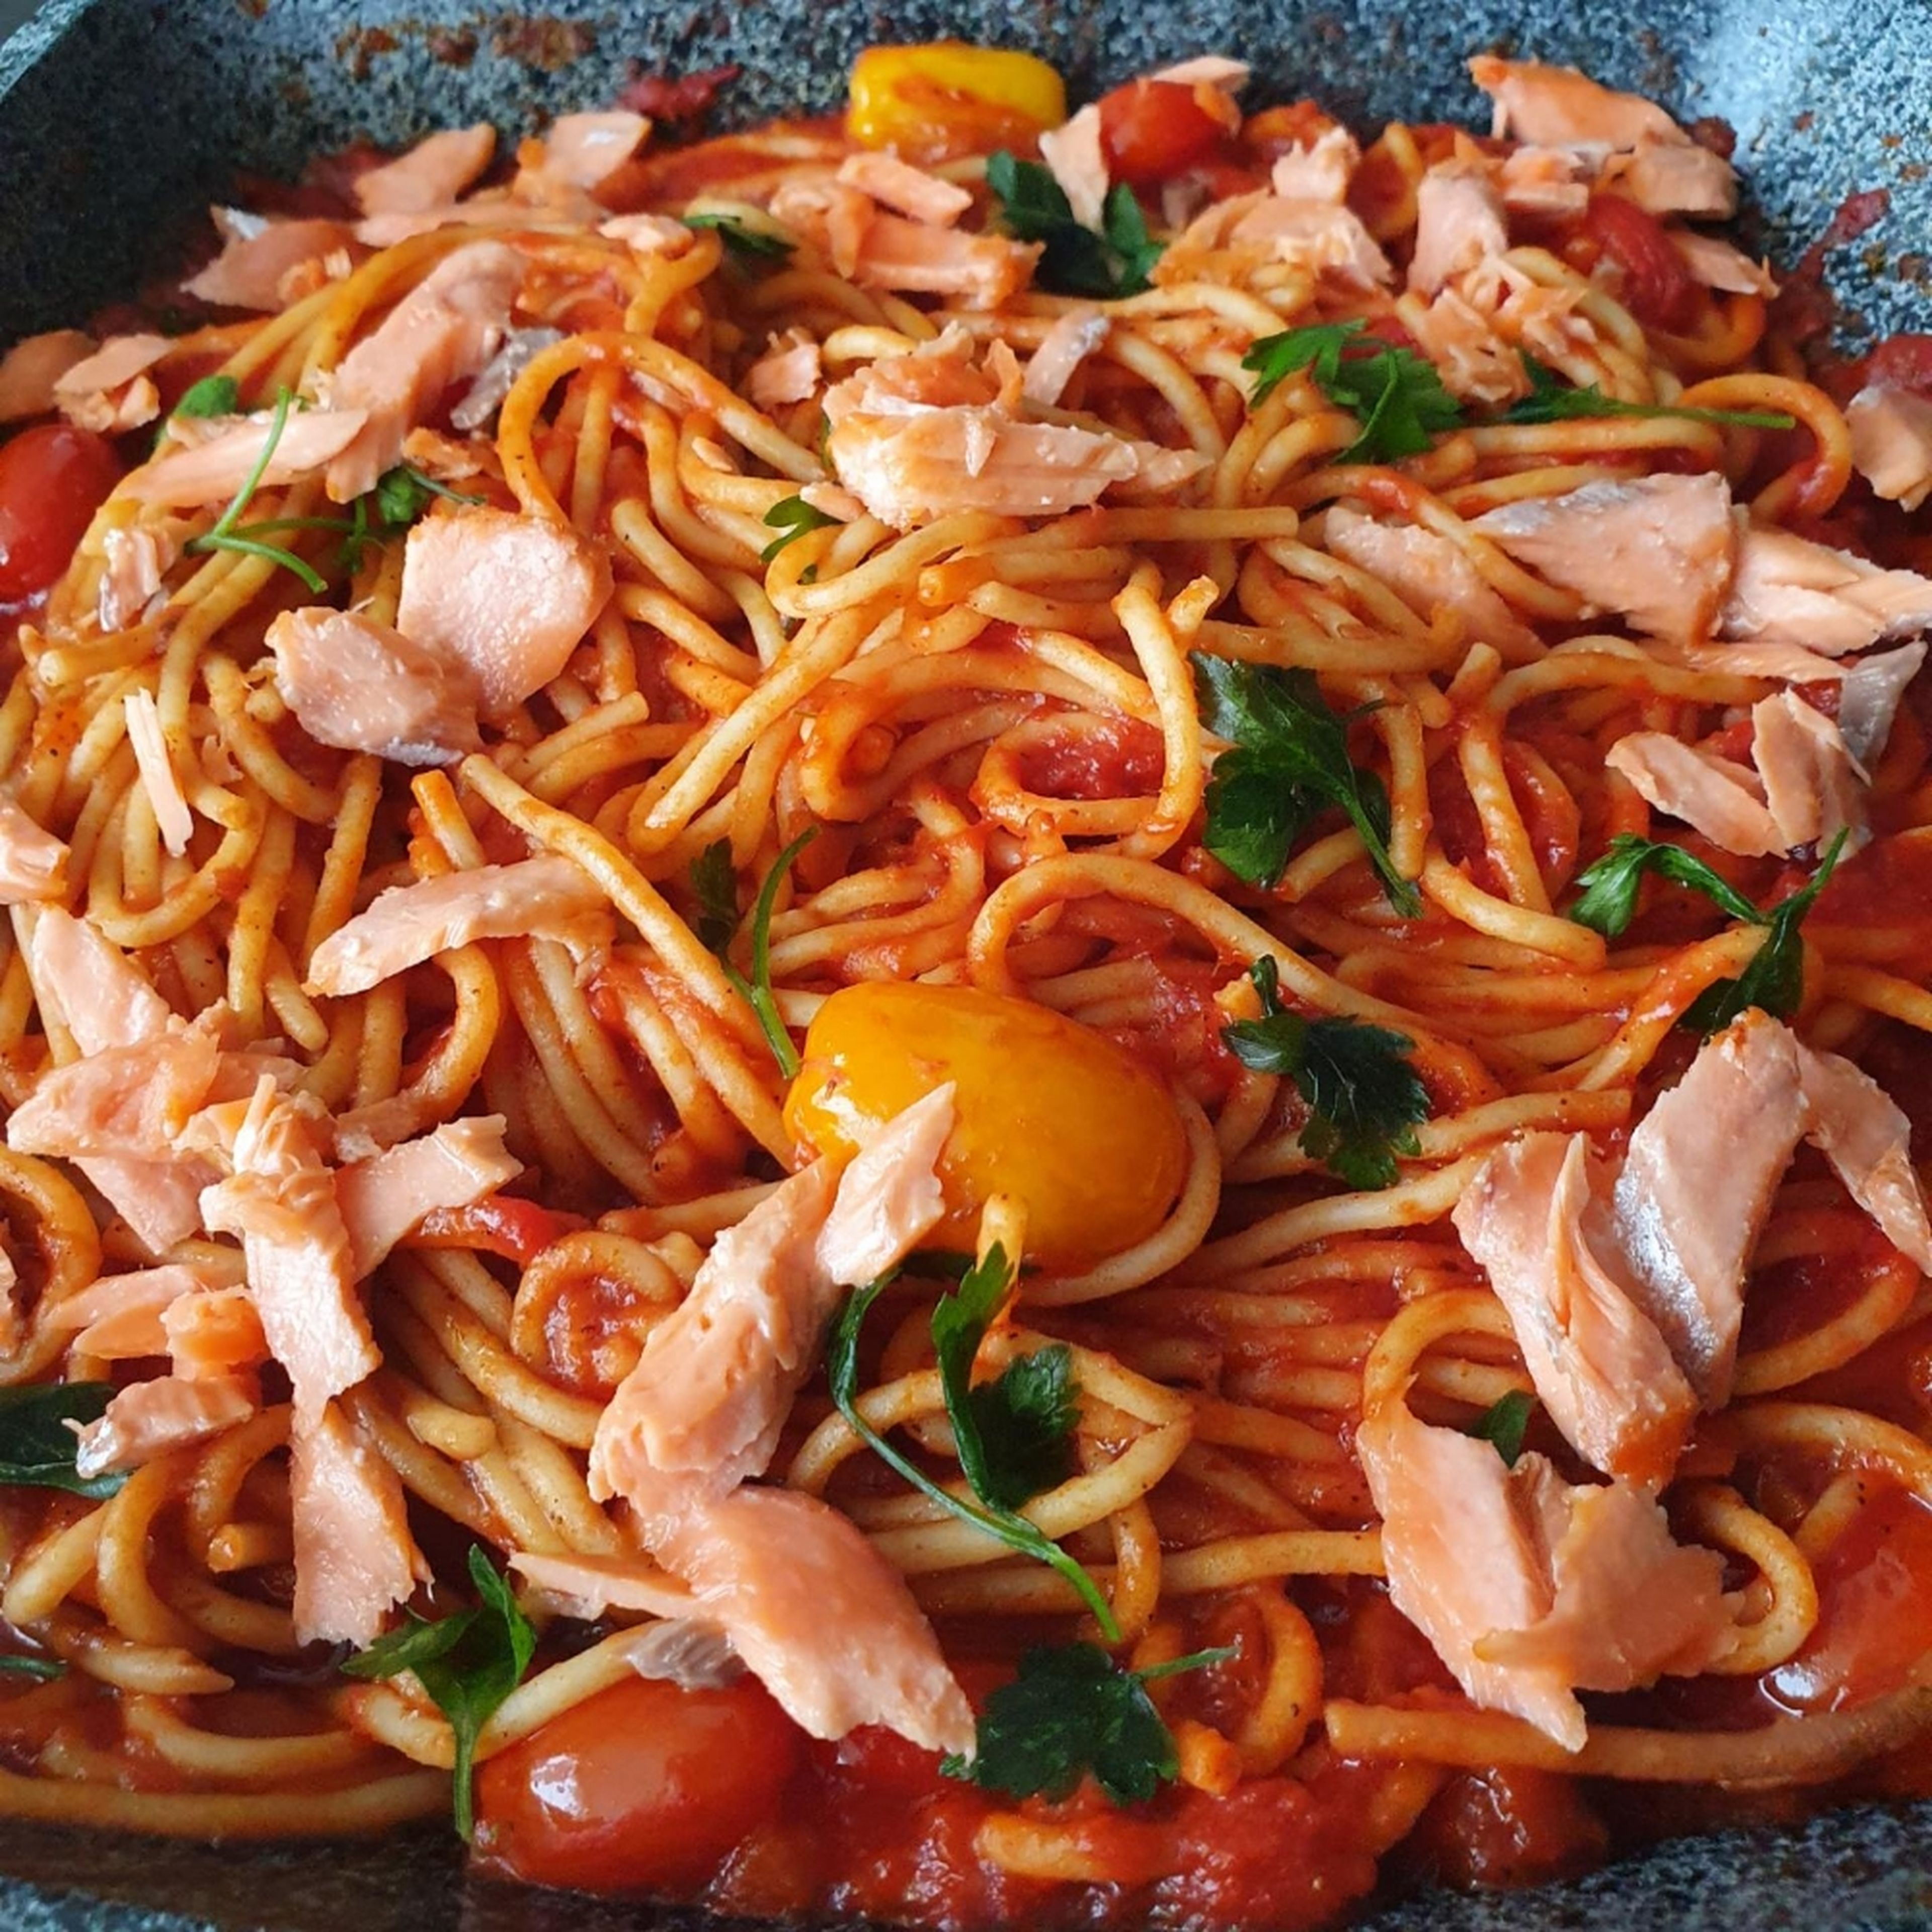 After the pasta is cooked, put it in a pan and add the tomato sauce and the cherry tomatoes. Let the pasta with the tomato sauce cook for about 5 minutes. We break the salmon into pieces and at the end we place them over the pasta, together with the parsley and parmesan. Bon apetit ! 😁